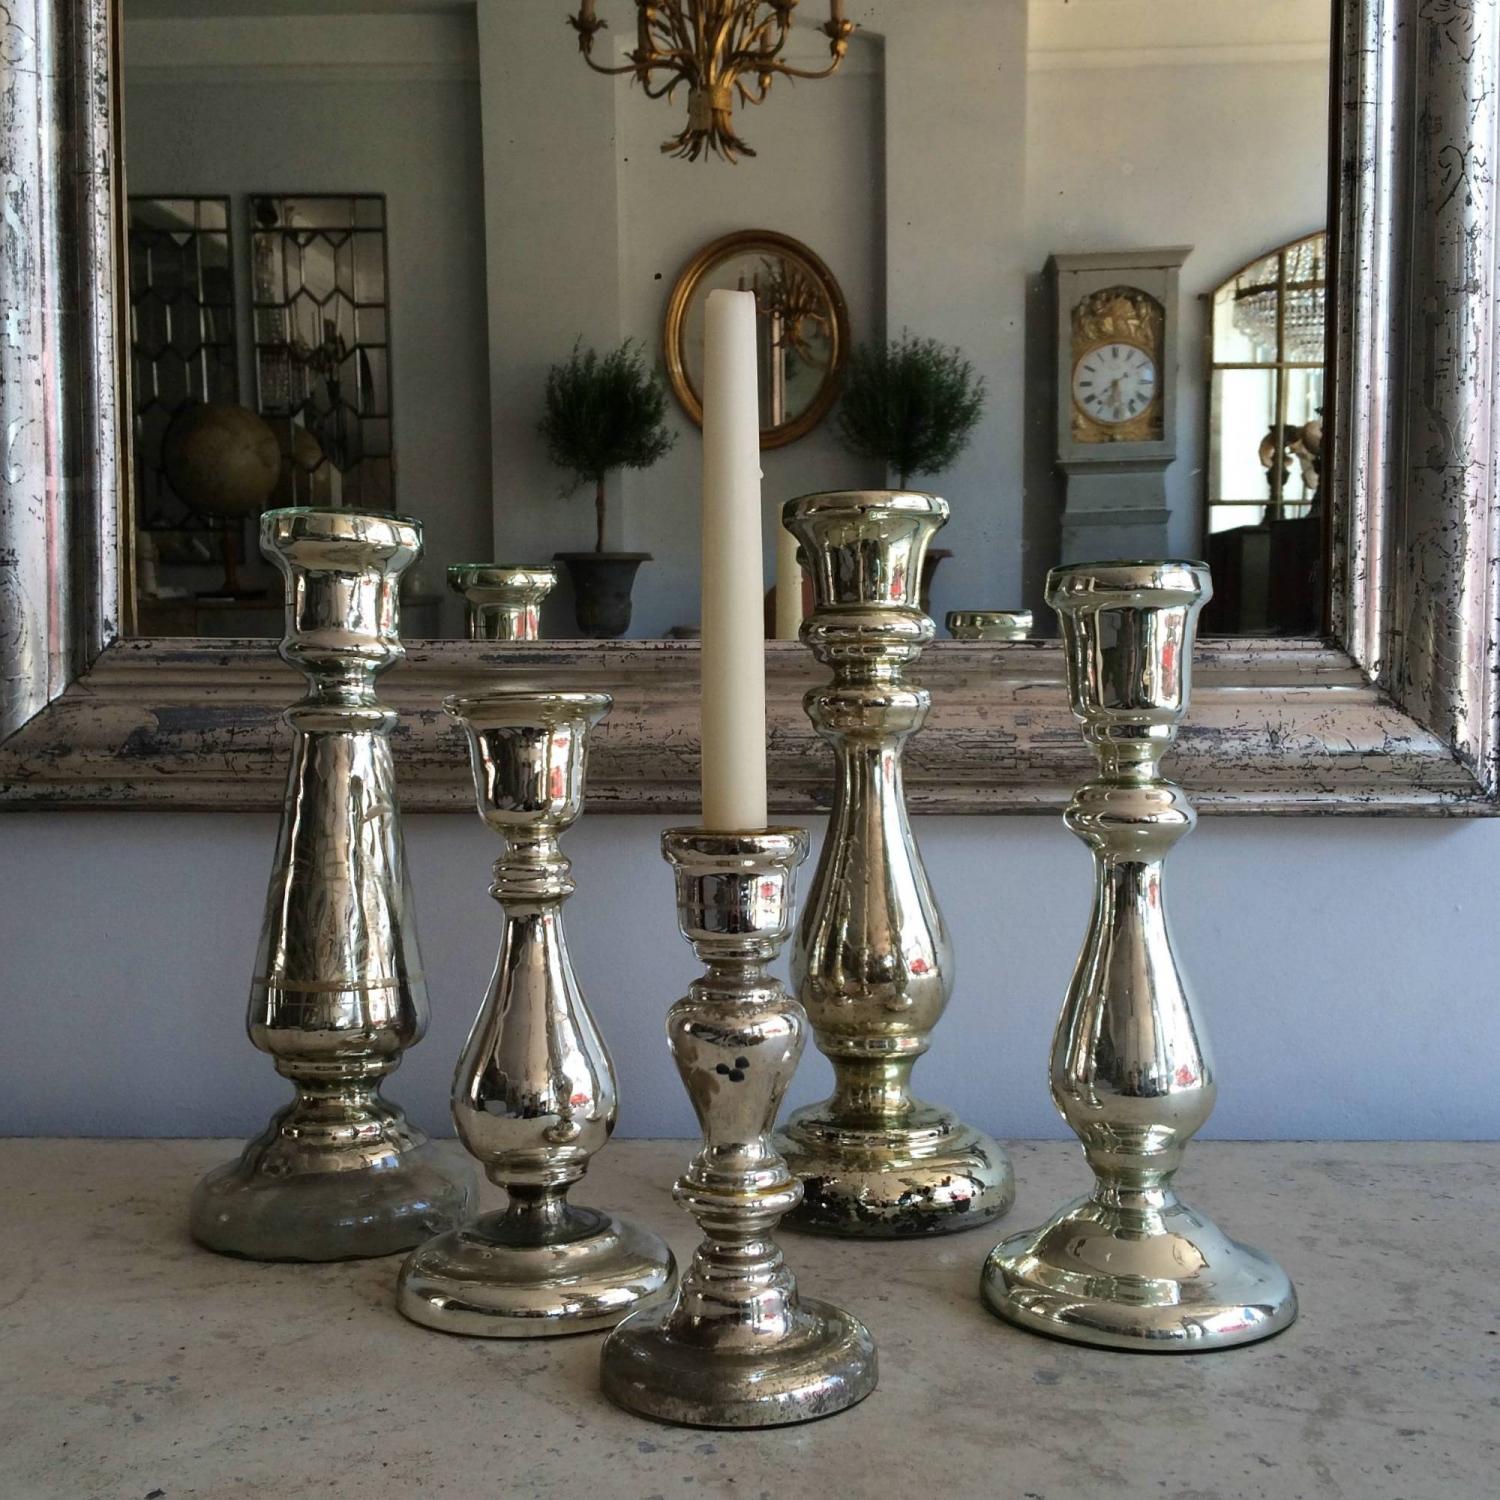 COLLECTION OF 19TH CENTURY MERCURY GLASS CANDLESTICKS